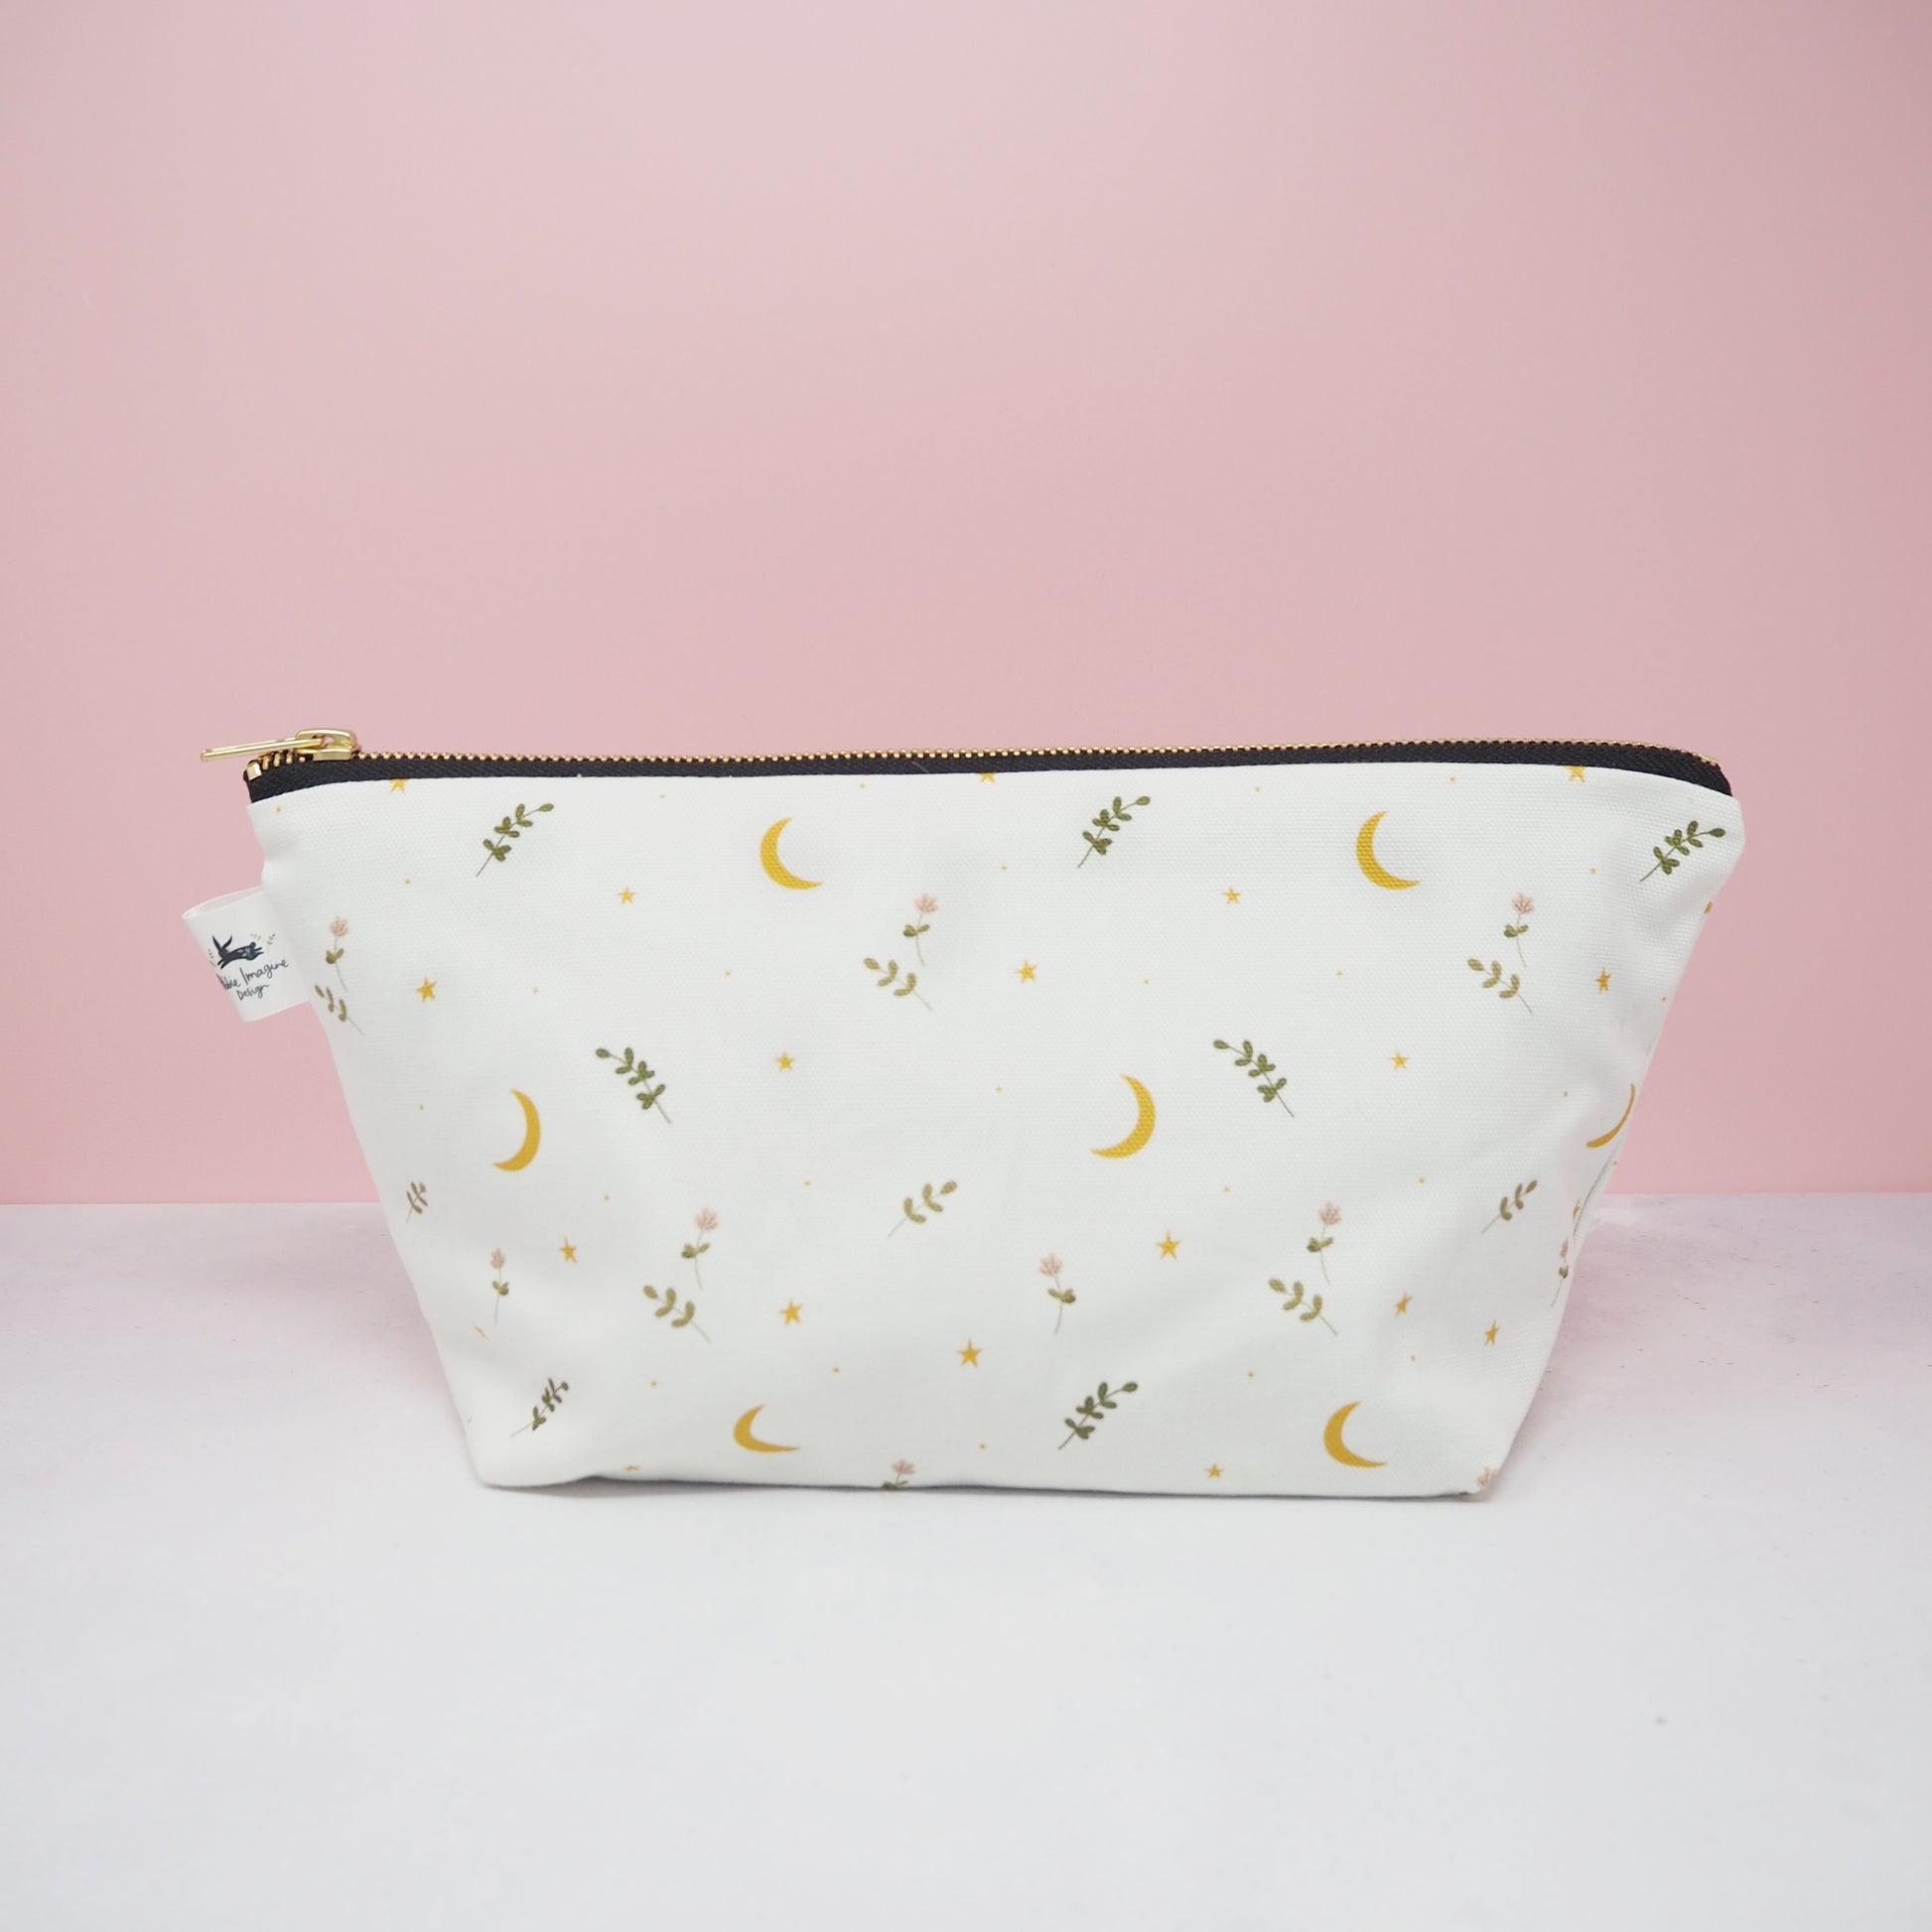 Moons and stars cosmetic bag by Abbie Imagine